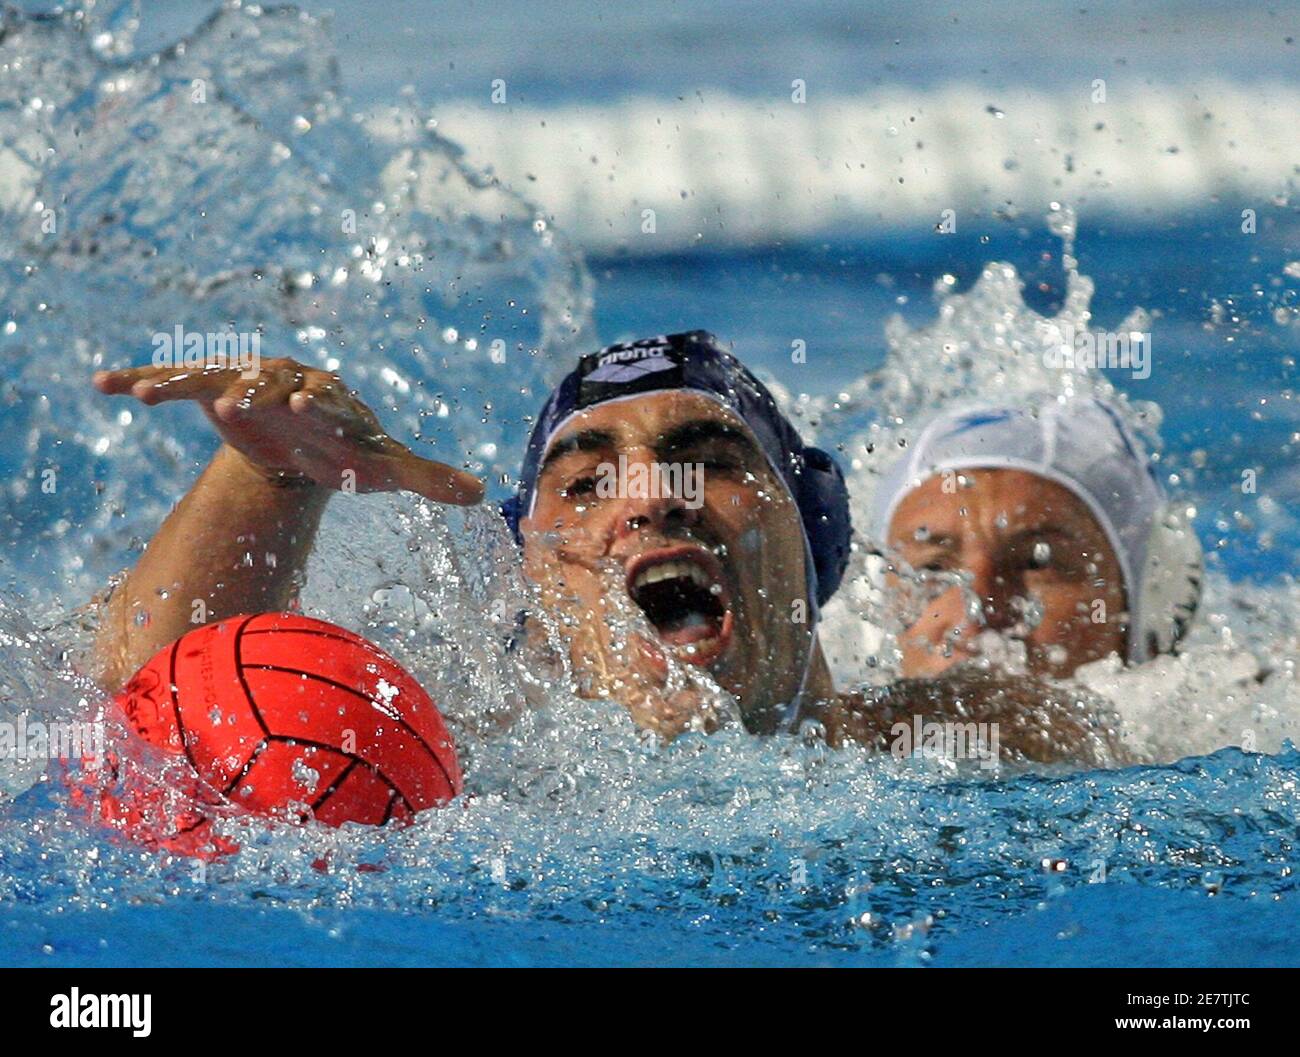 Italy's Alessandro Calcaterra (L) struggles for the ball with Romania's  Alexandru Matei during their quarterfinal match at the water polo European  Championships in Belgrade September 7, 2006. REUTERS/Ivan Milutinovic  (SERBIA Stock Photo -